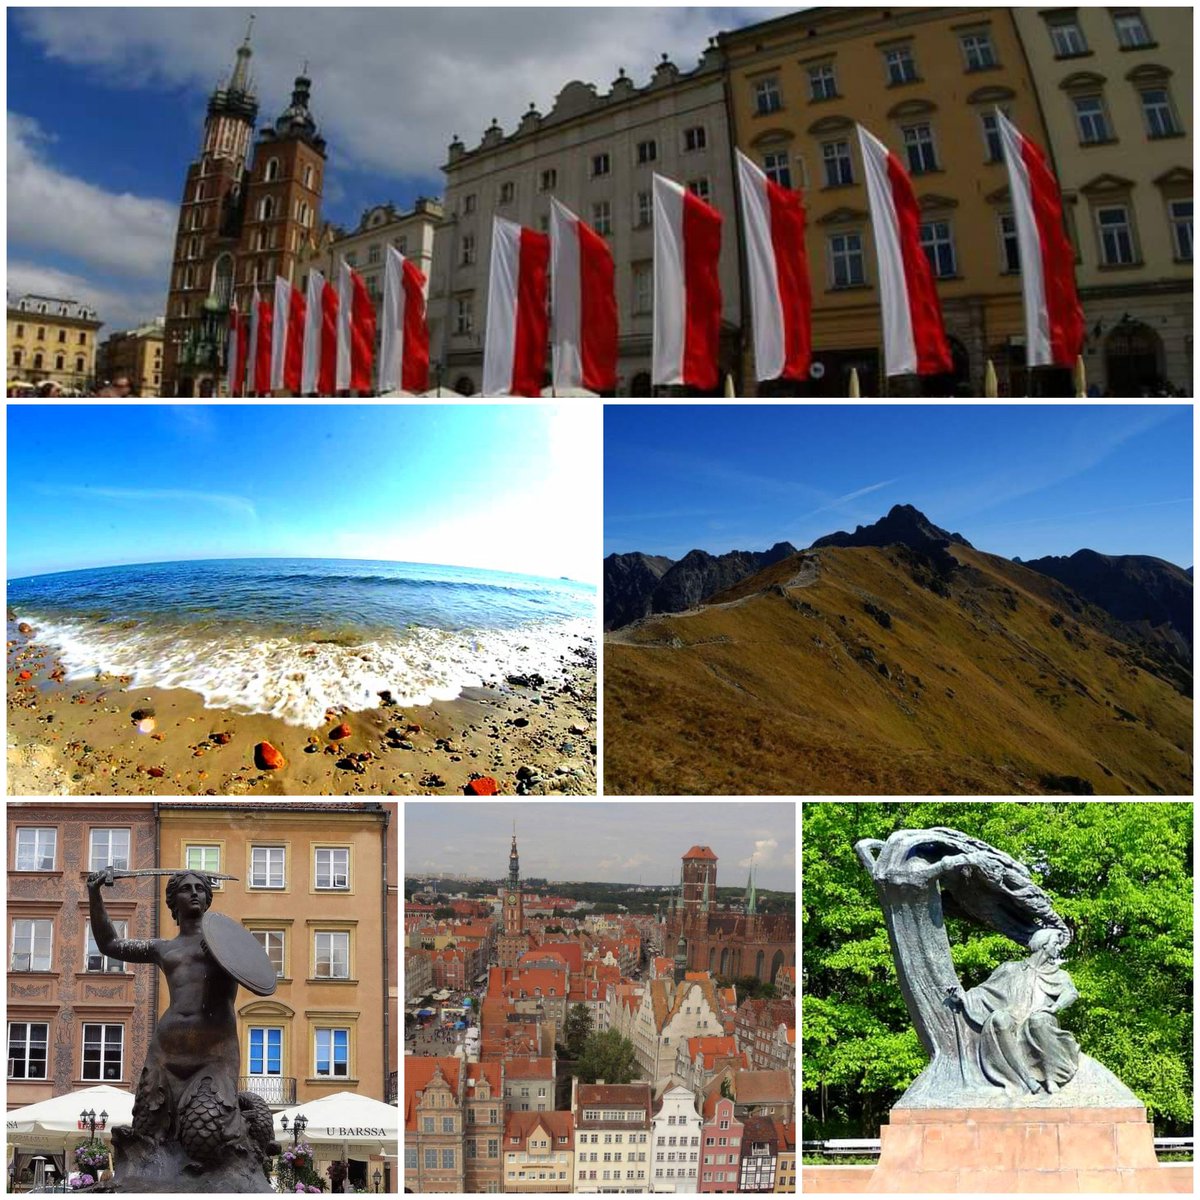 On Day  29 of #MayIRecommendA2Z, today's theme is 'Europe'
So all about #Poland  🇵🇱
Thx to hosts:
@journiesofalife @live4sights @ExpressionsSA